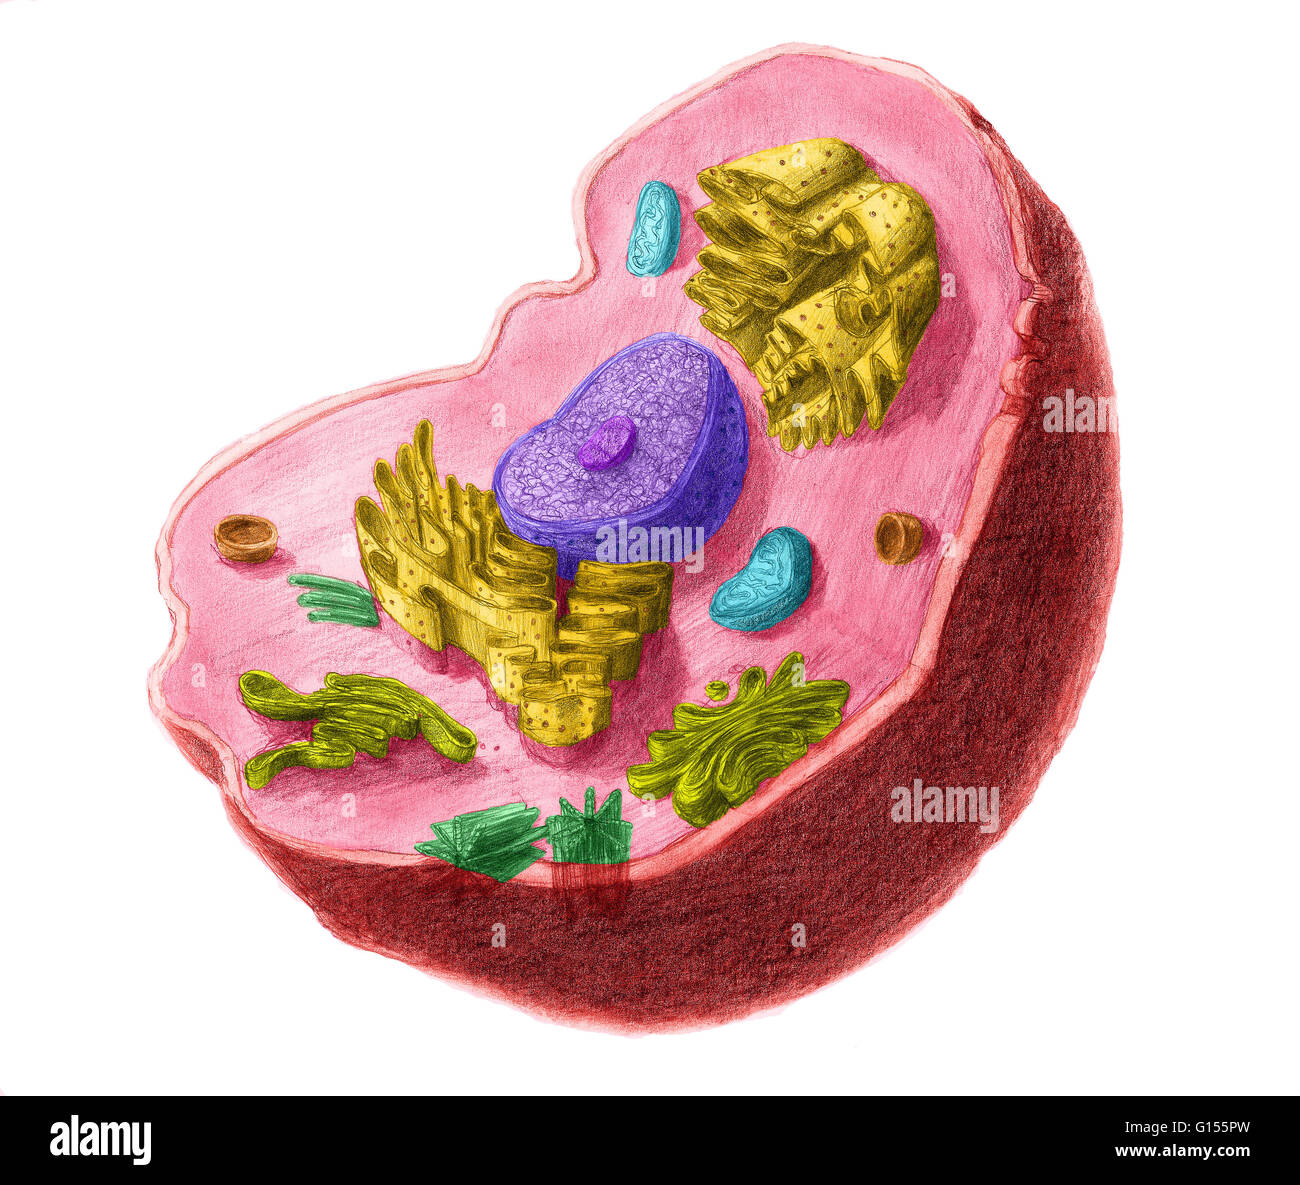 Color Enhanced Illustartion Of An Animal Cell The Cell Has A Nucleus In Its Center That Contains Chromatine Constituted Of Dna And Nucleole Composed Of Rna And Proteins Around The Nucleus We